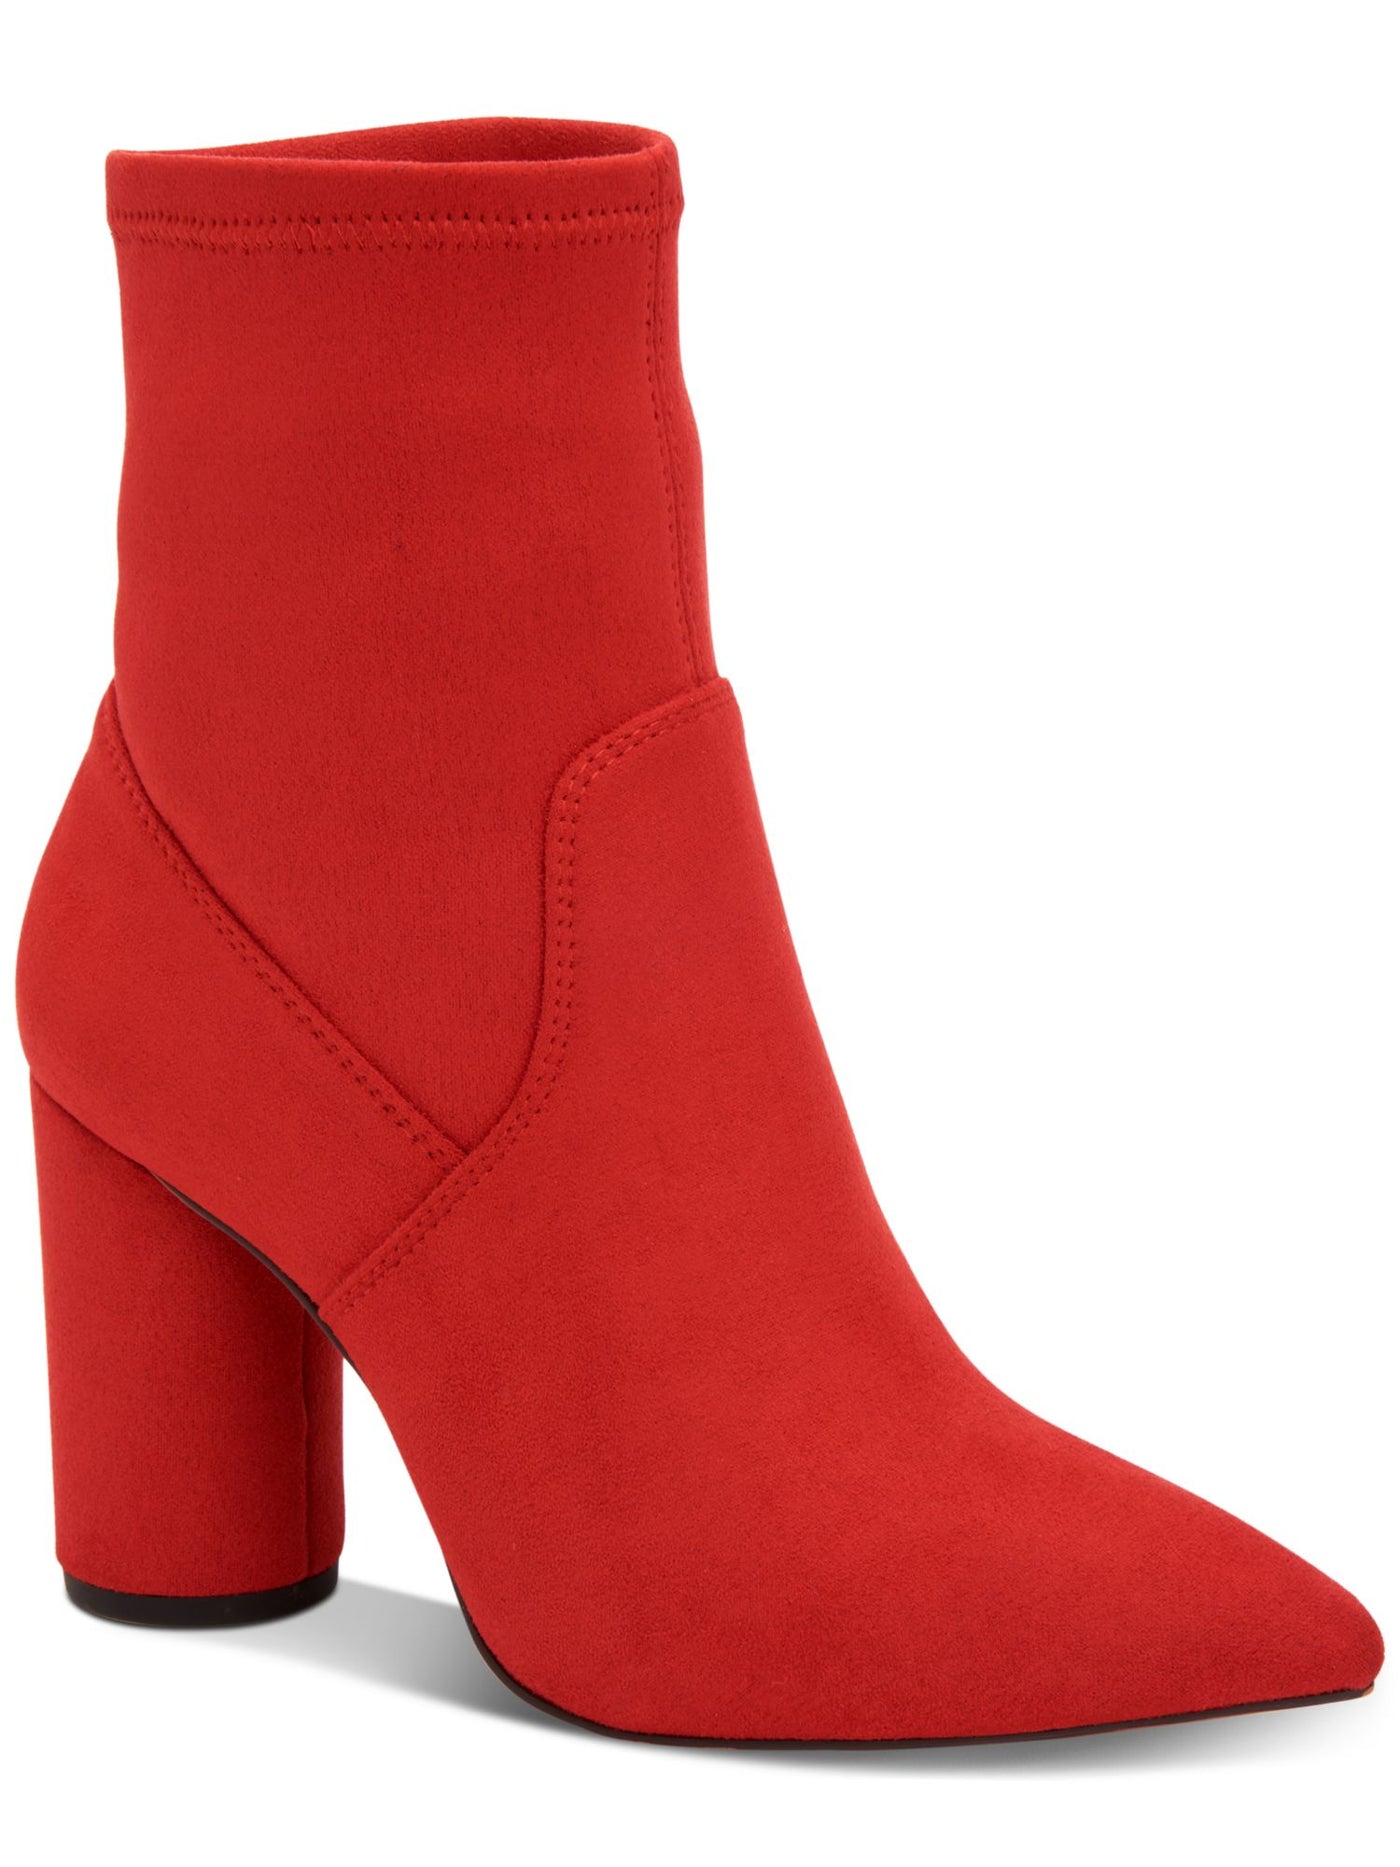 BCBGENERATION Womens Red Cushioned Breathable Ally Pointed Toe Sculpted Heel Zip-Up Dress Booties 7 B